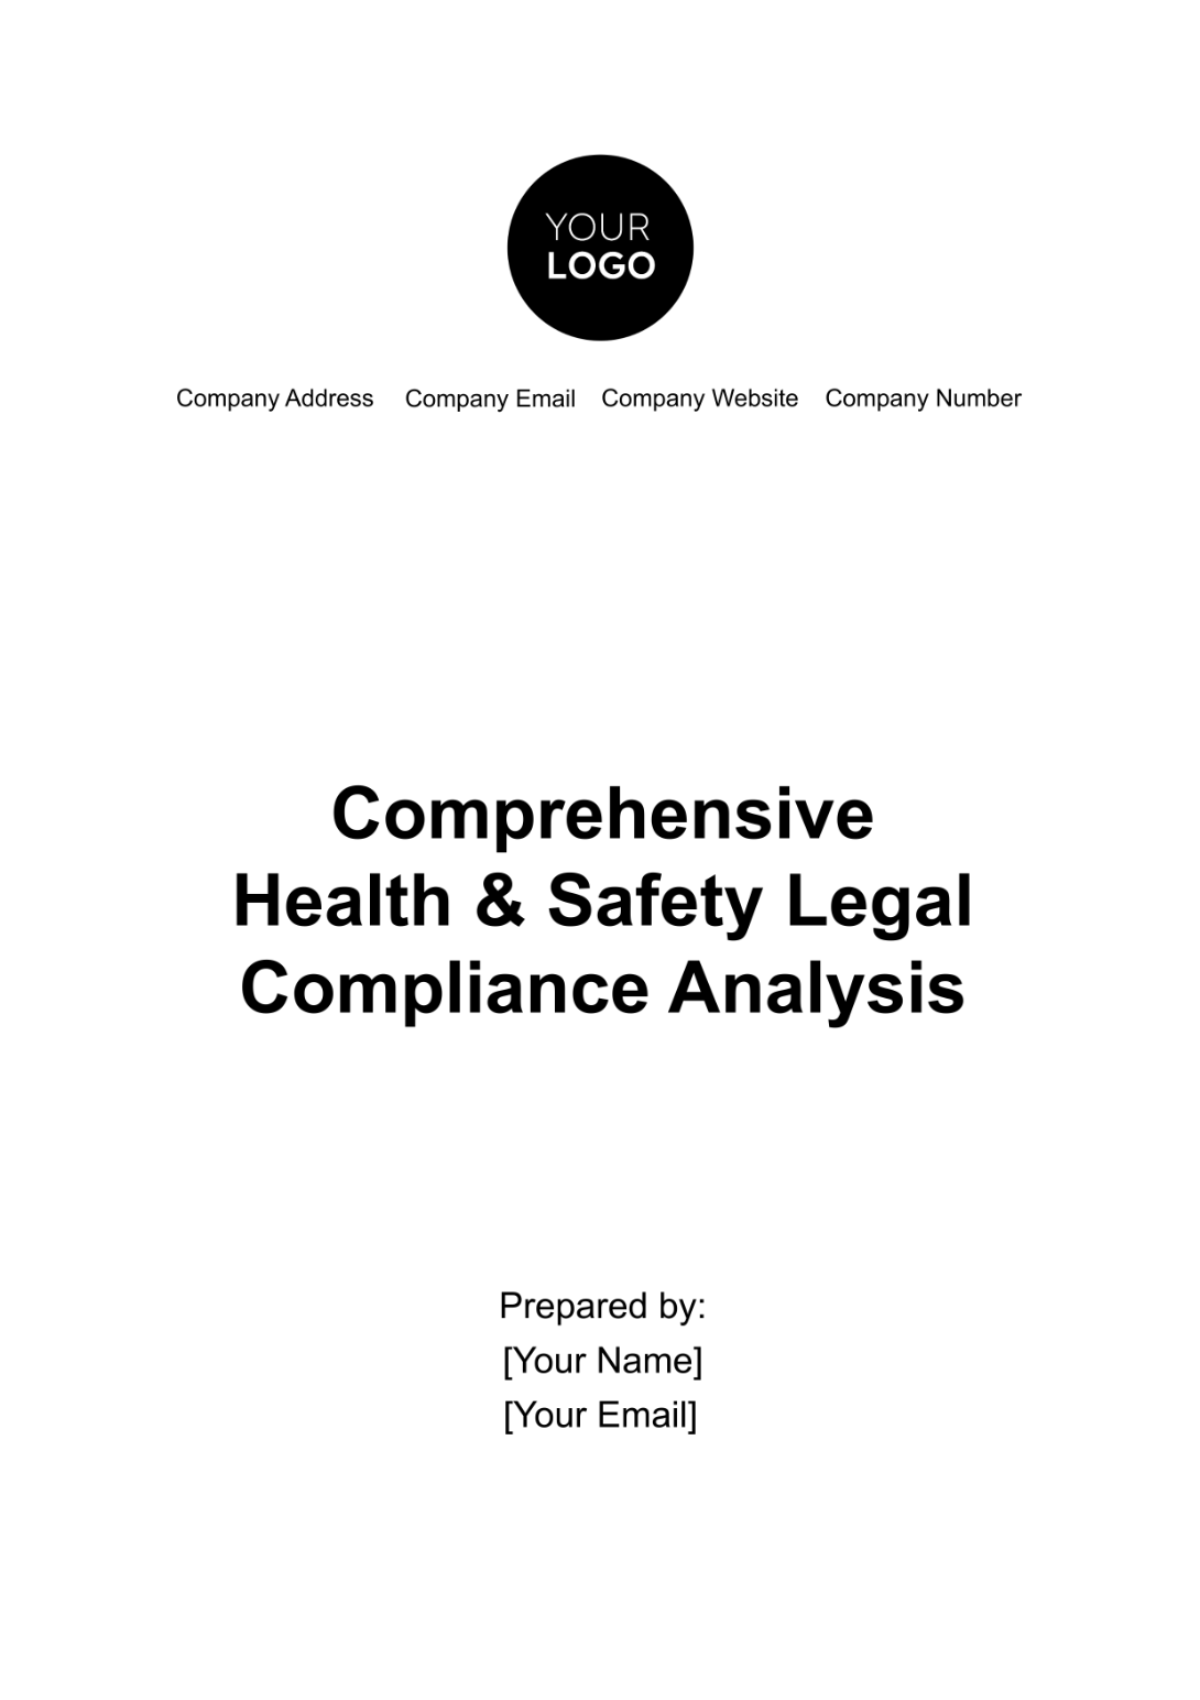 Free Comprehensive Health & Safety Legal Compliance Analysis Template